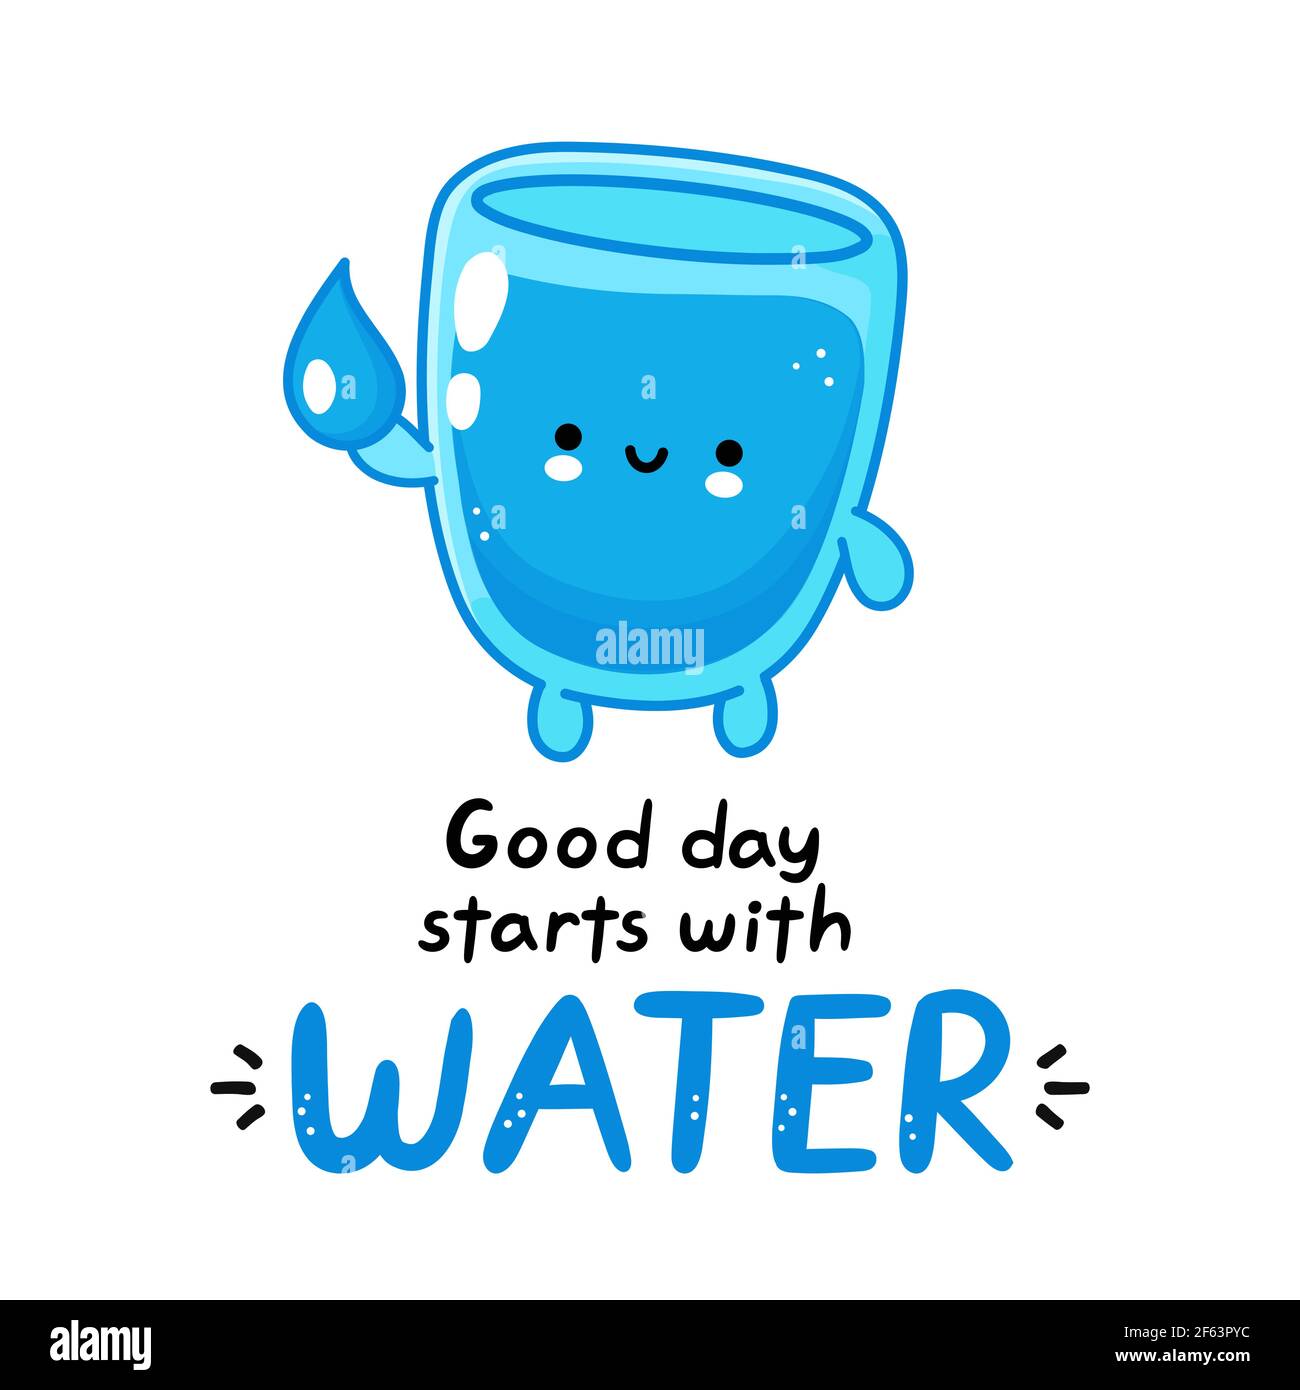 https://c8.alamy.com/comp/2F63PYC/cute-funny-happy-water-glass-character-hold-aqua-drop-vector-flat-line-cartoon-kawaii-character-illustration-icon-isolated-on-white-background-good-day-starts-with-water-cardposter-concept-2F63PYC.jpg